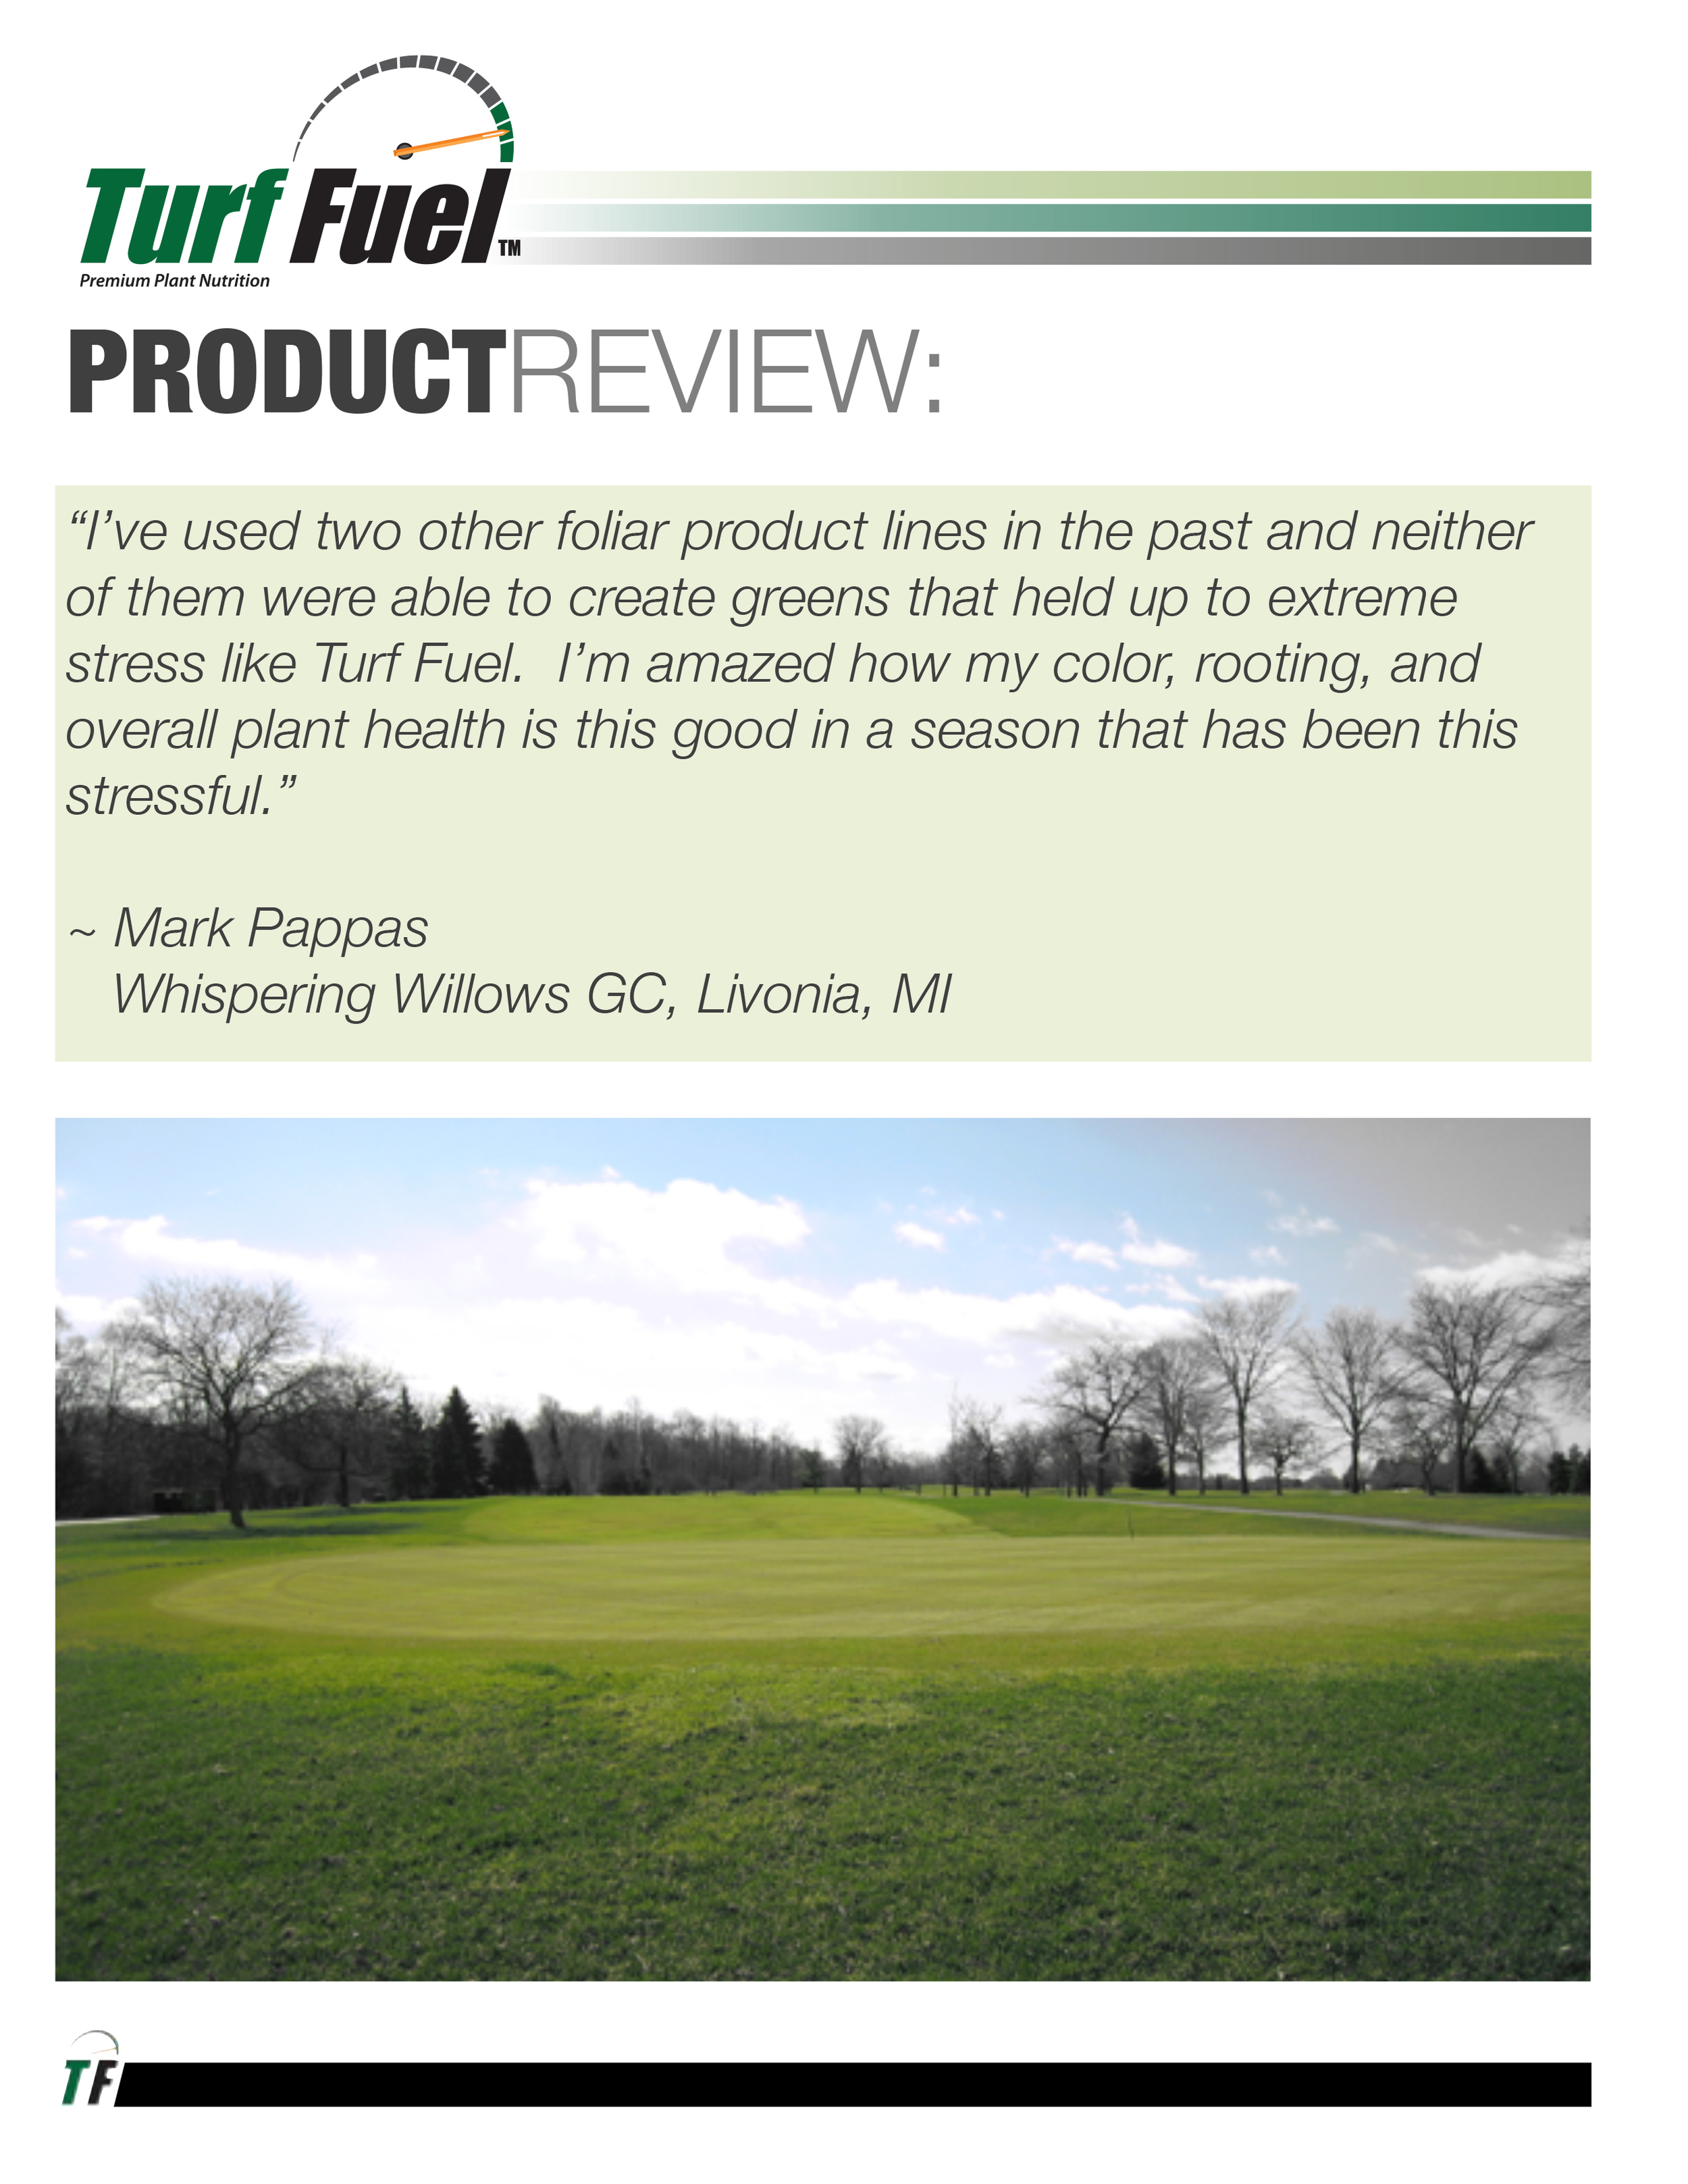 PRODUCT REVIEW Whispering Willows